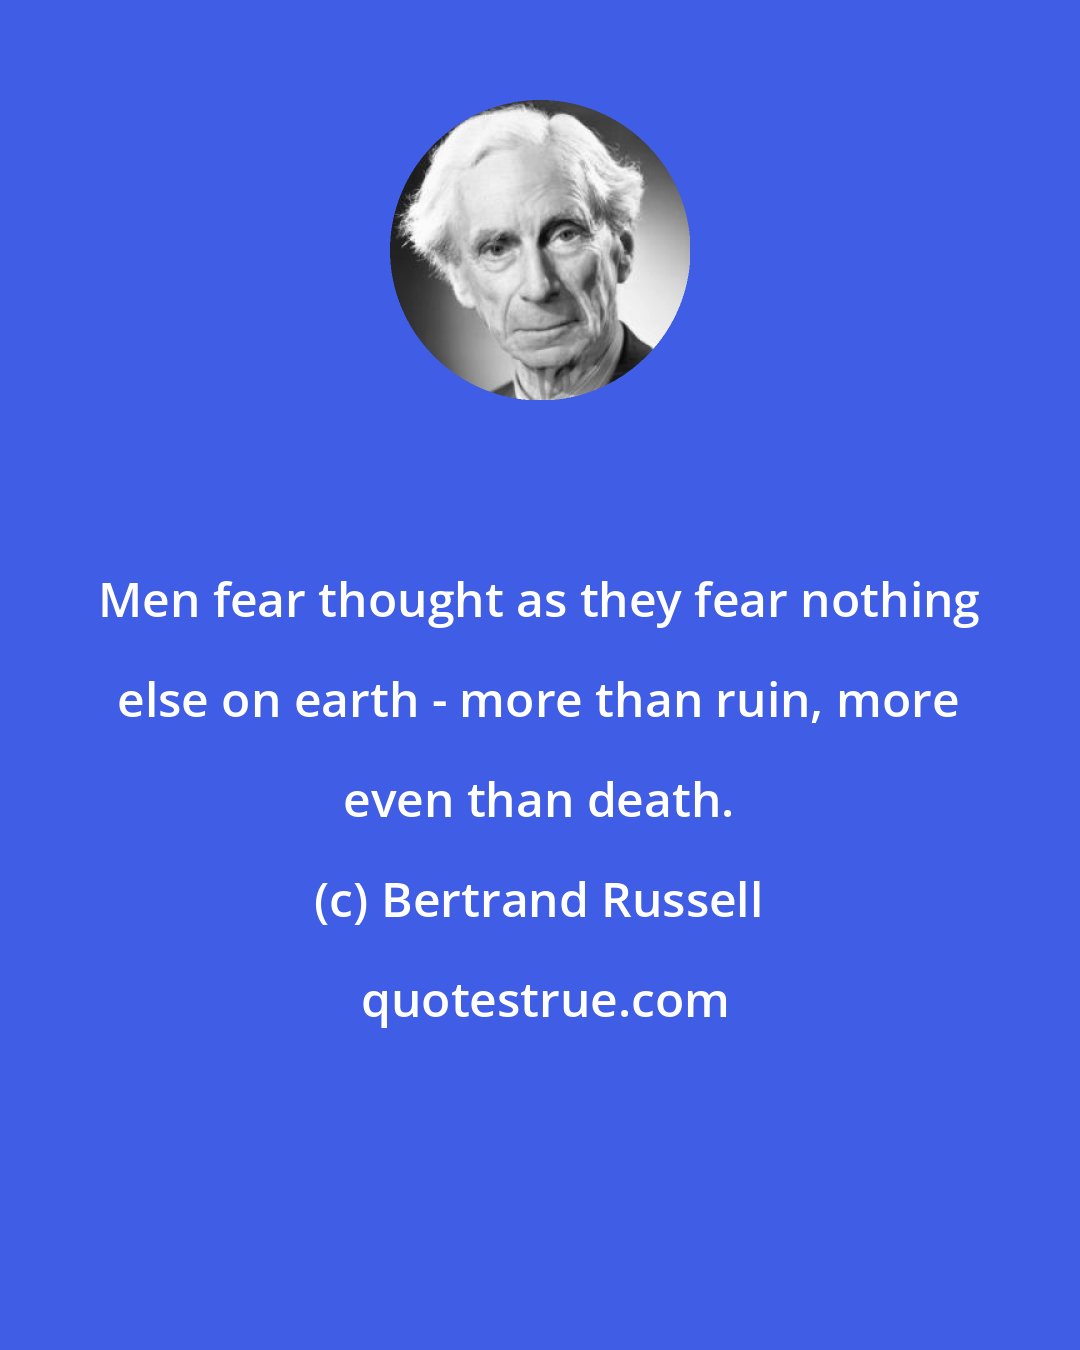 Bertrand Russell: Men fear thought as they fear nothing else on earth - more than ruin, more even than death.